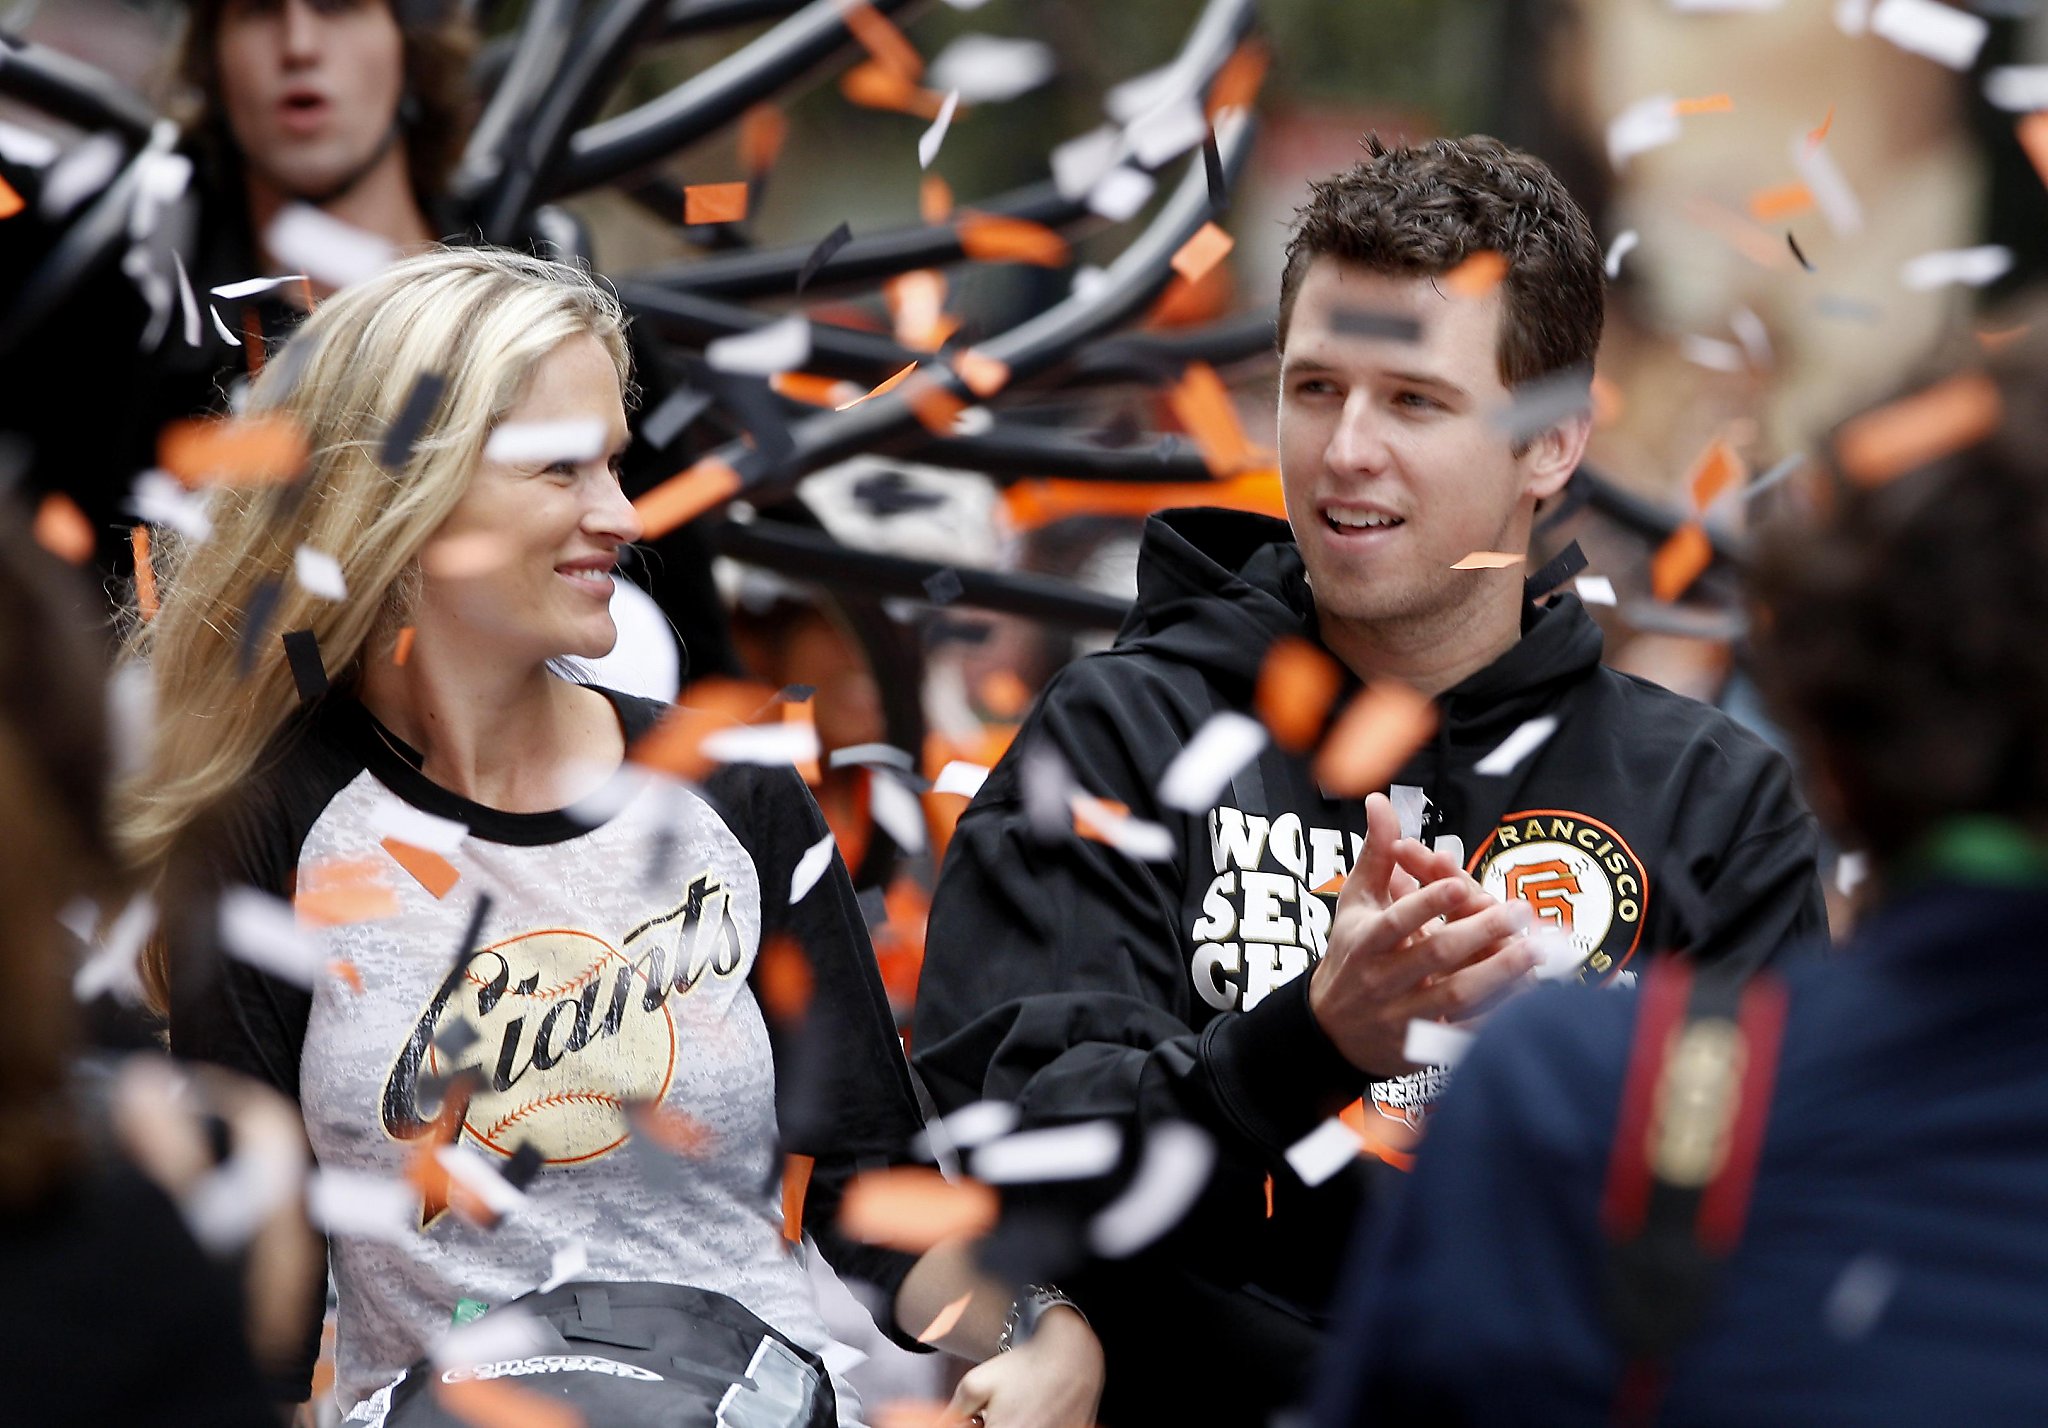 San Francisco Giants' Buster Posey, wife Kristen donate proceeds